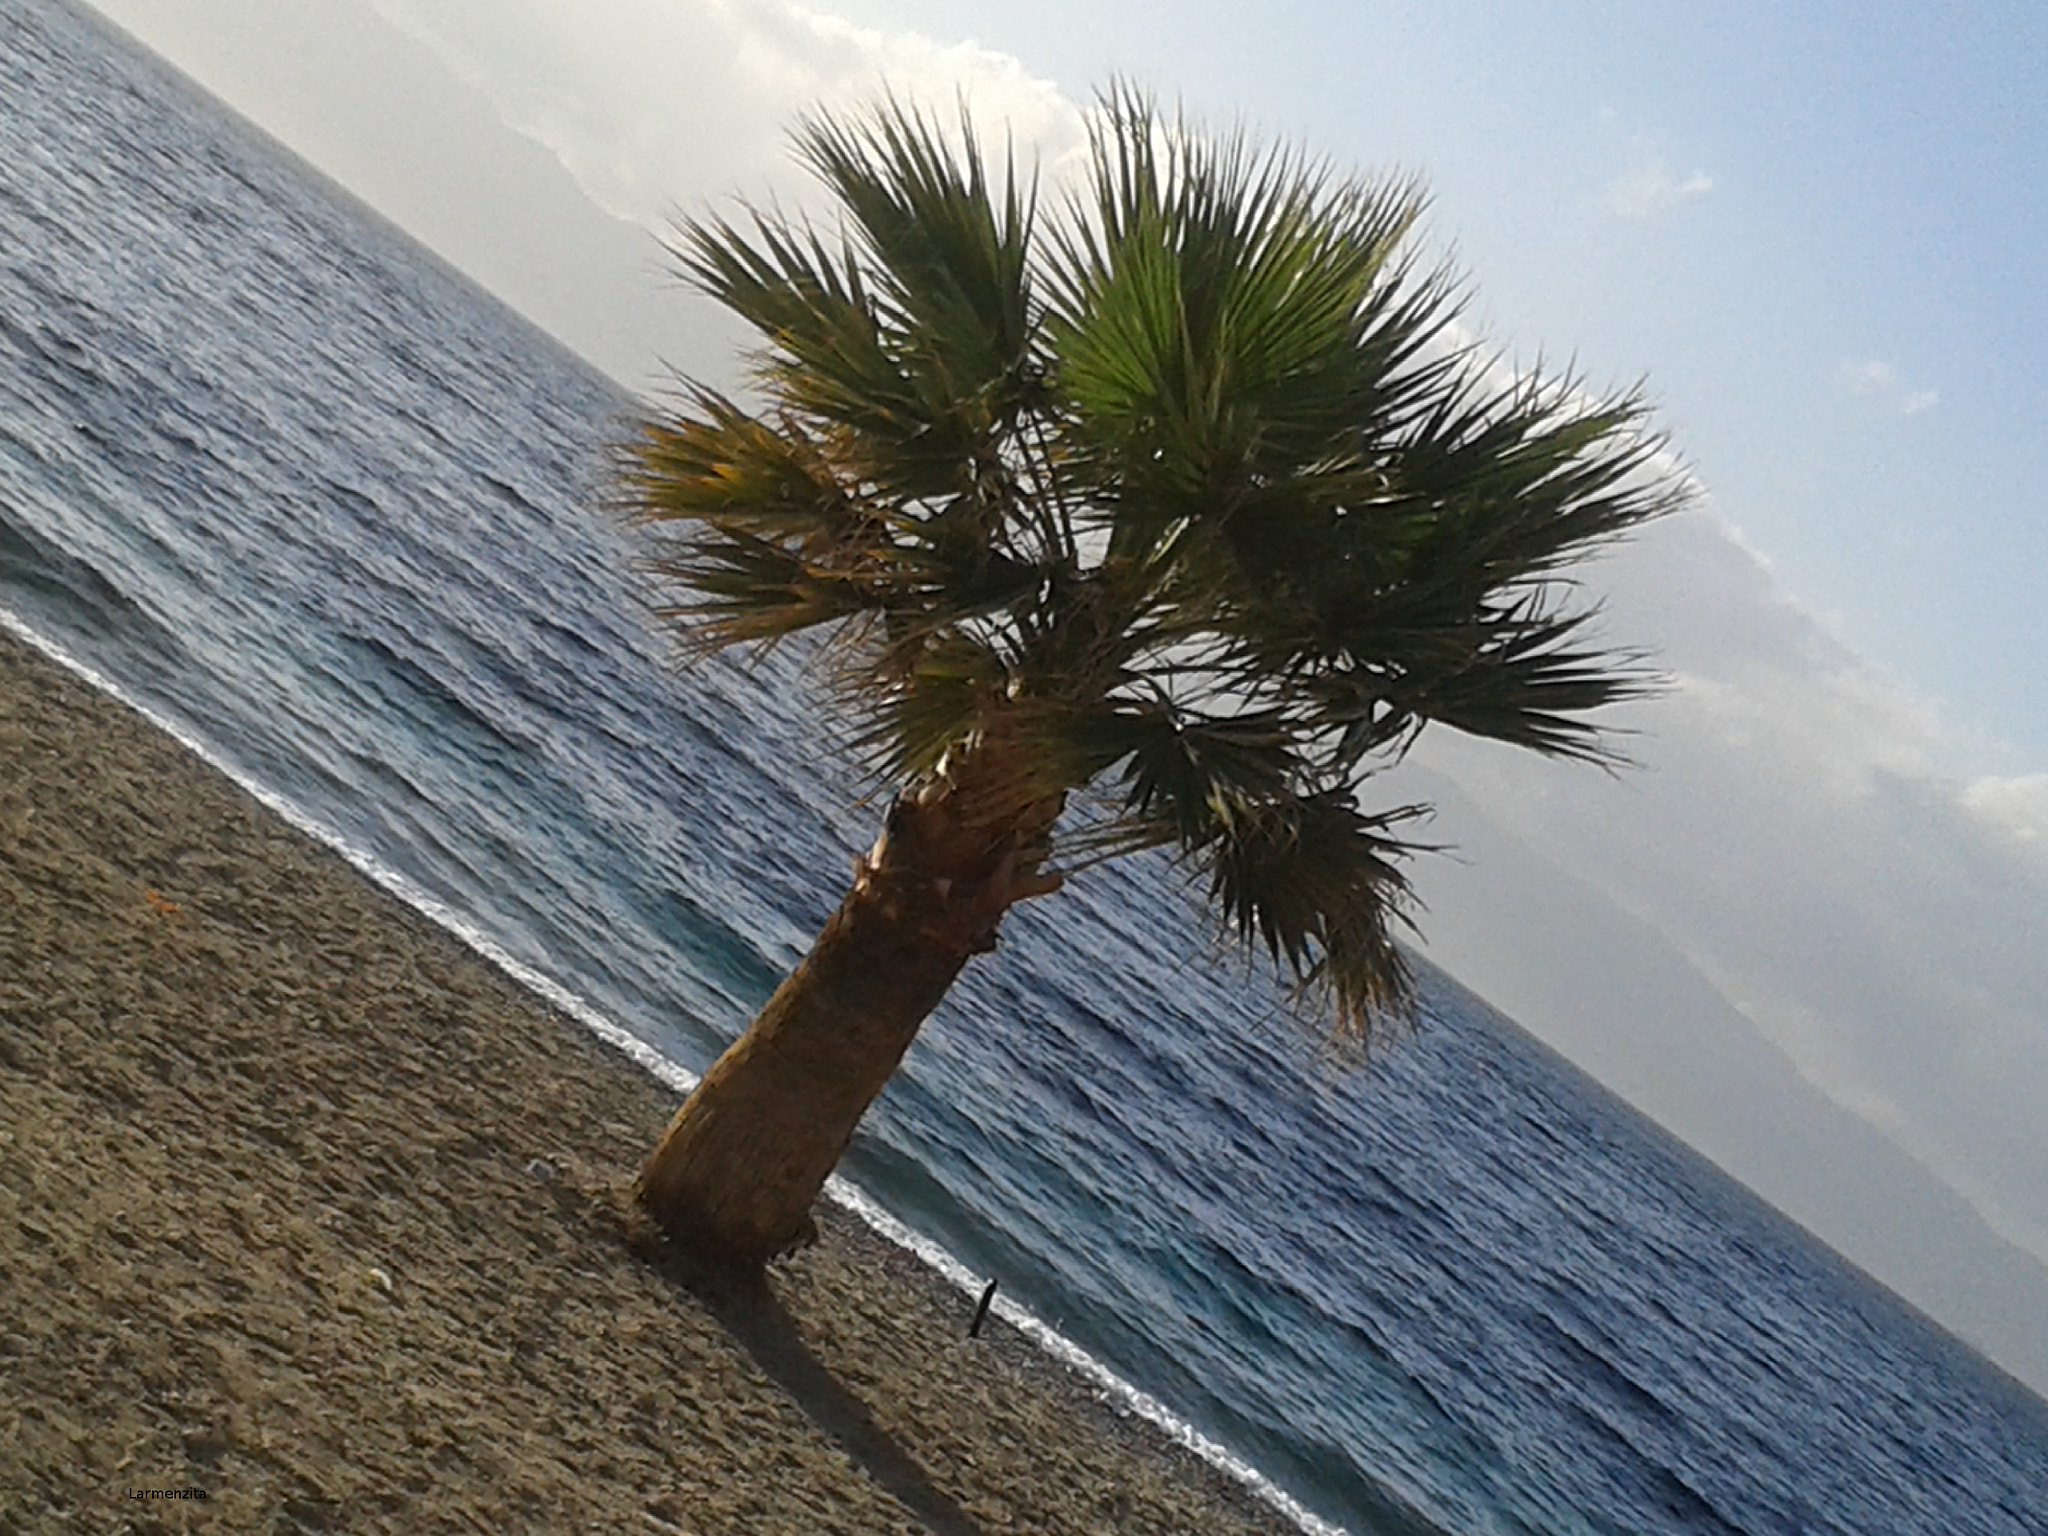 Samsung Galaxy S3 Mini sample photo. A lonely palm in the beach photography